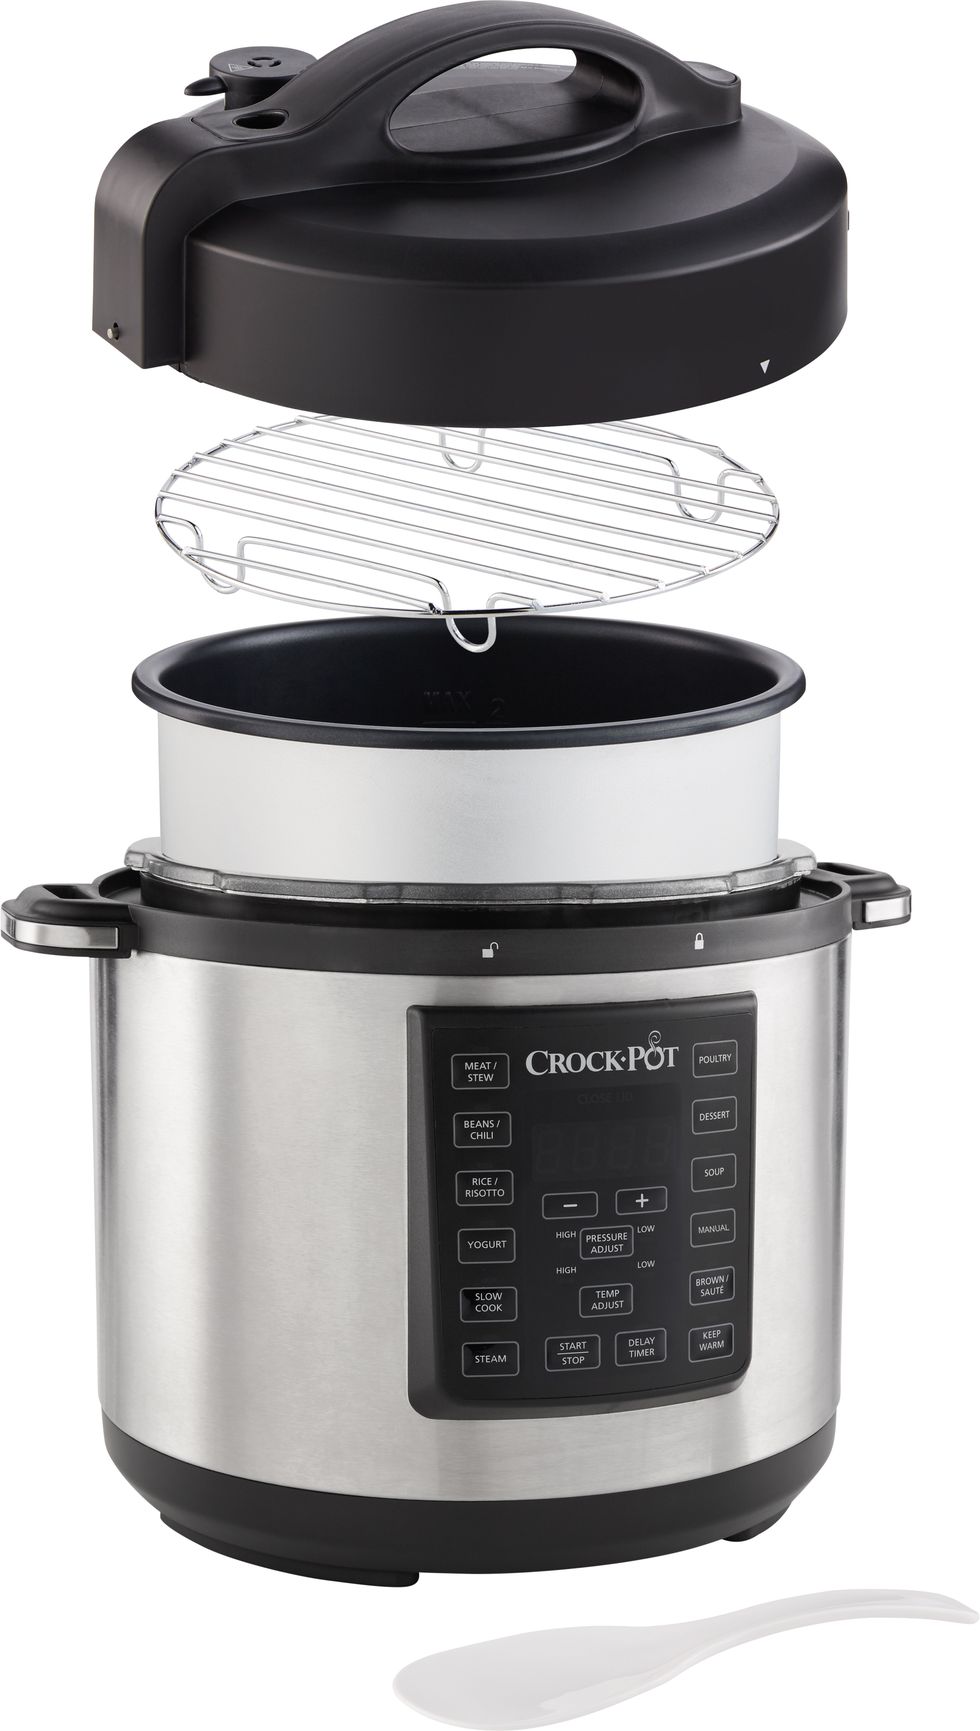 Food steamer, Small appliance, Home appliance, Product, Pressure cooker, Cookware and bakeware, Lid, Kitchen appliance, Rice cooker, Slow cooker, 